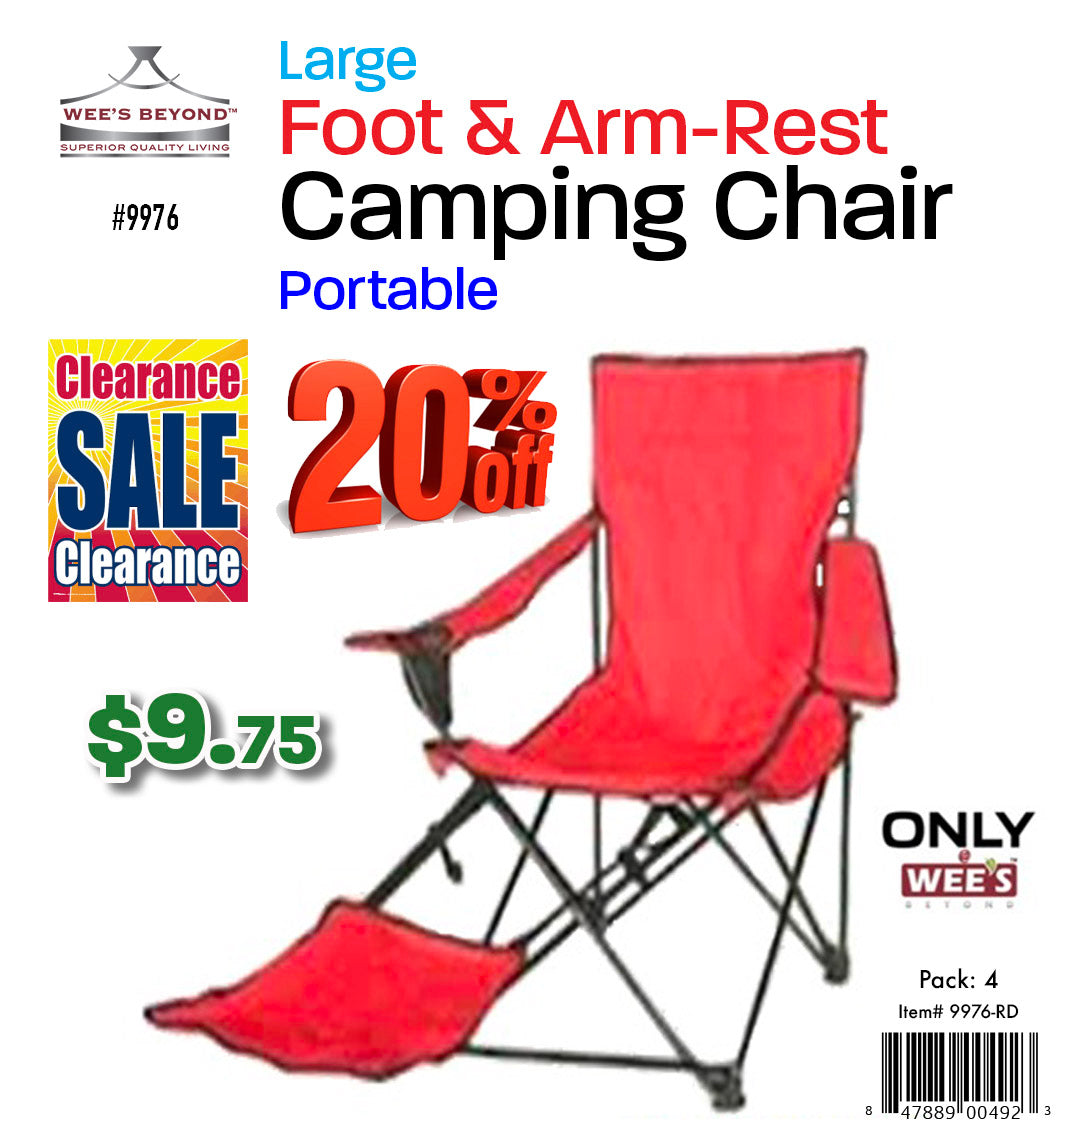 9976 Rd Wee S Beyond Large Foot And Arm Rest Camping Chair Case